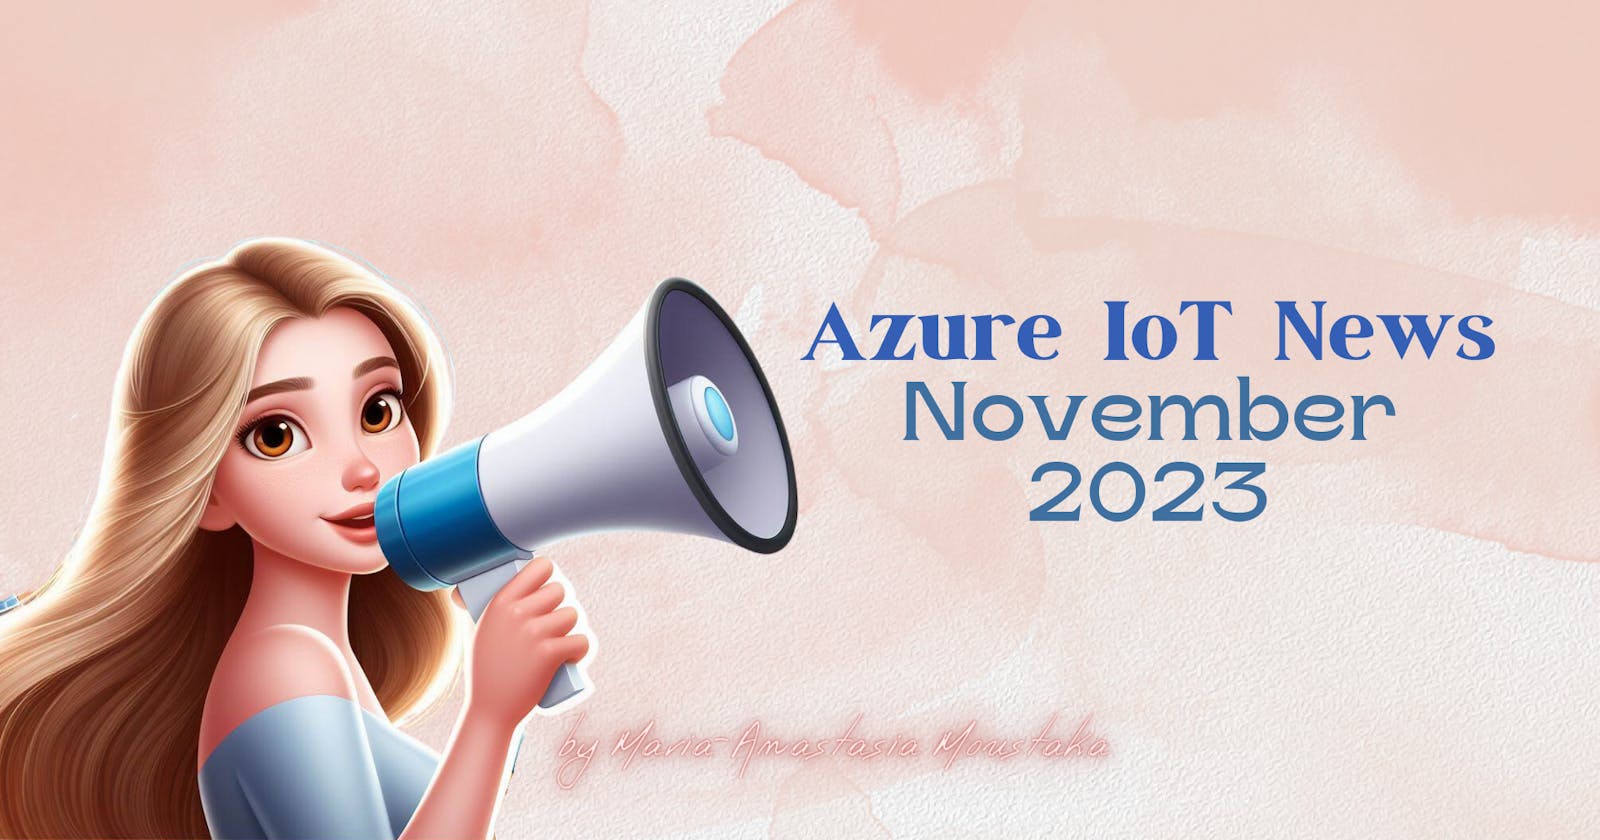 Azure IoT News – November 2023 by Think About IoT